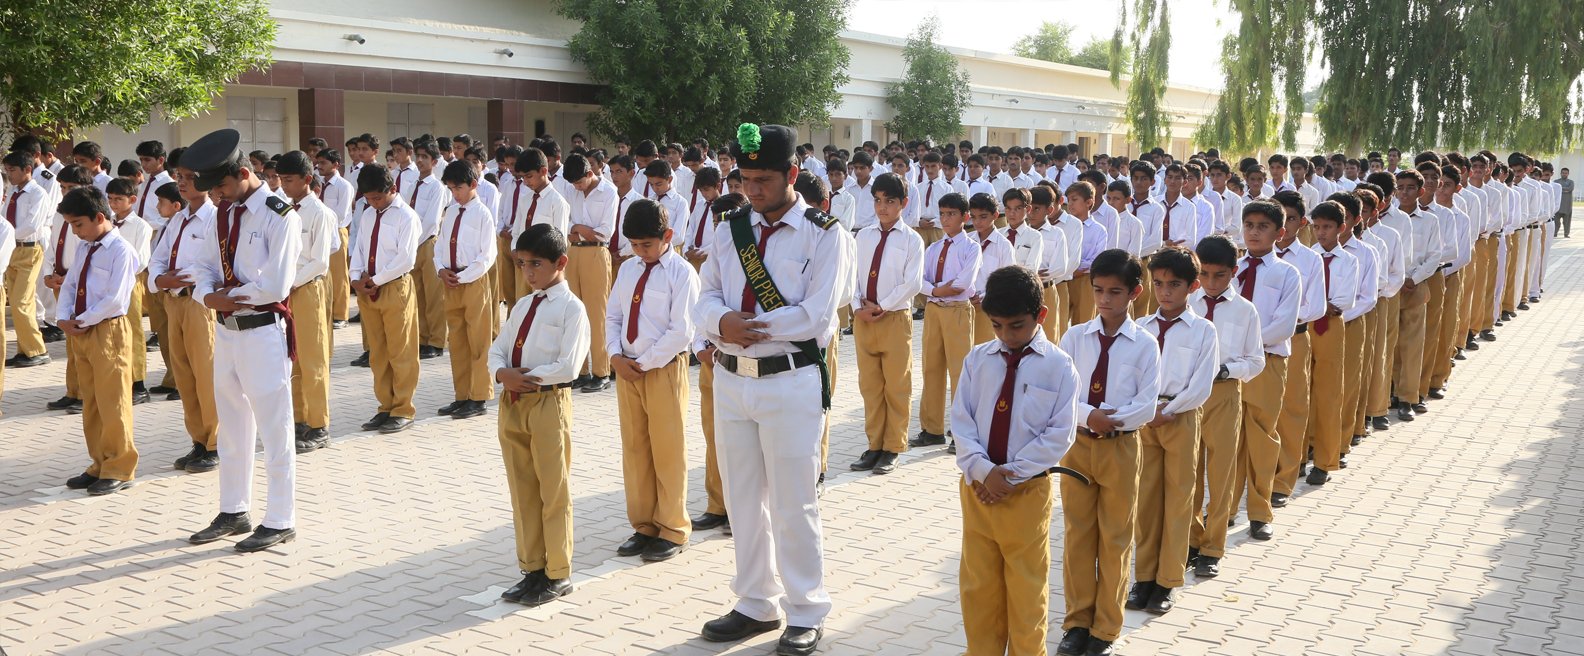 Sui Model School and Girls’ College Balochistan provides quality education to children of staff and locals